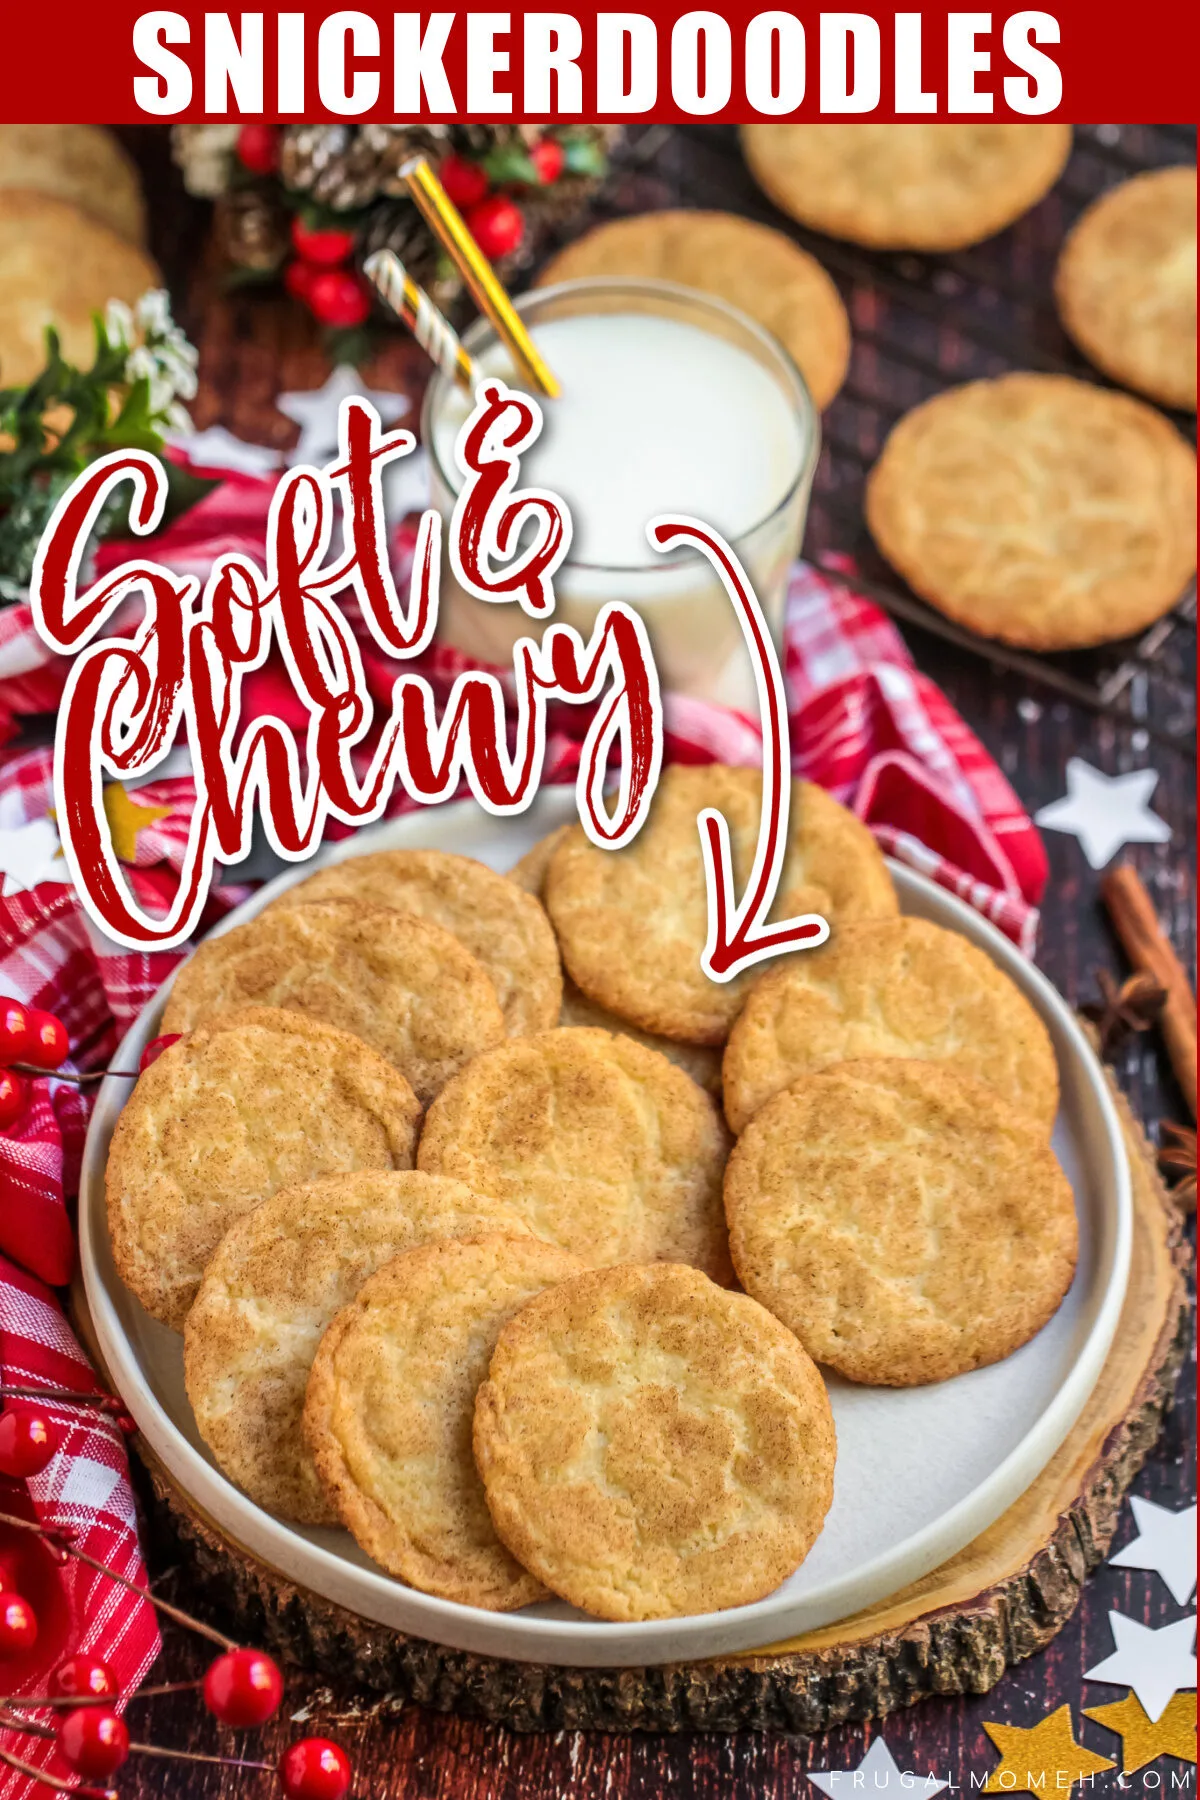 Looking for the perfect recipe for snickerdoodles? These delicious, soft & chewy cinnamon cookies are perfect for holiday celebrations!